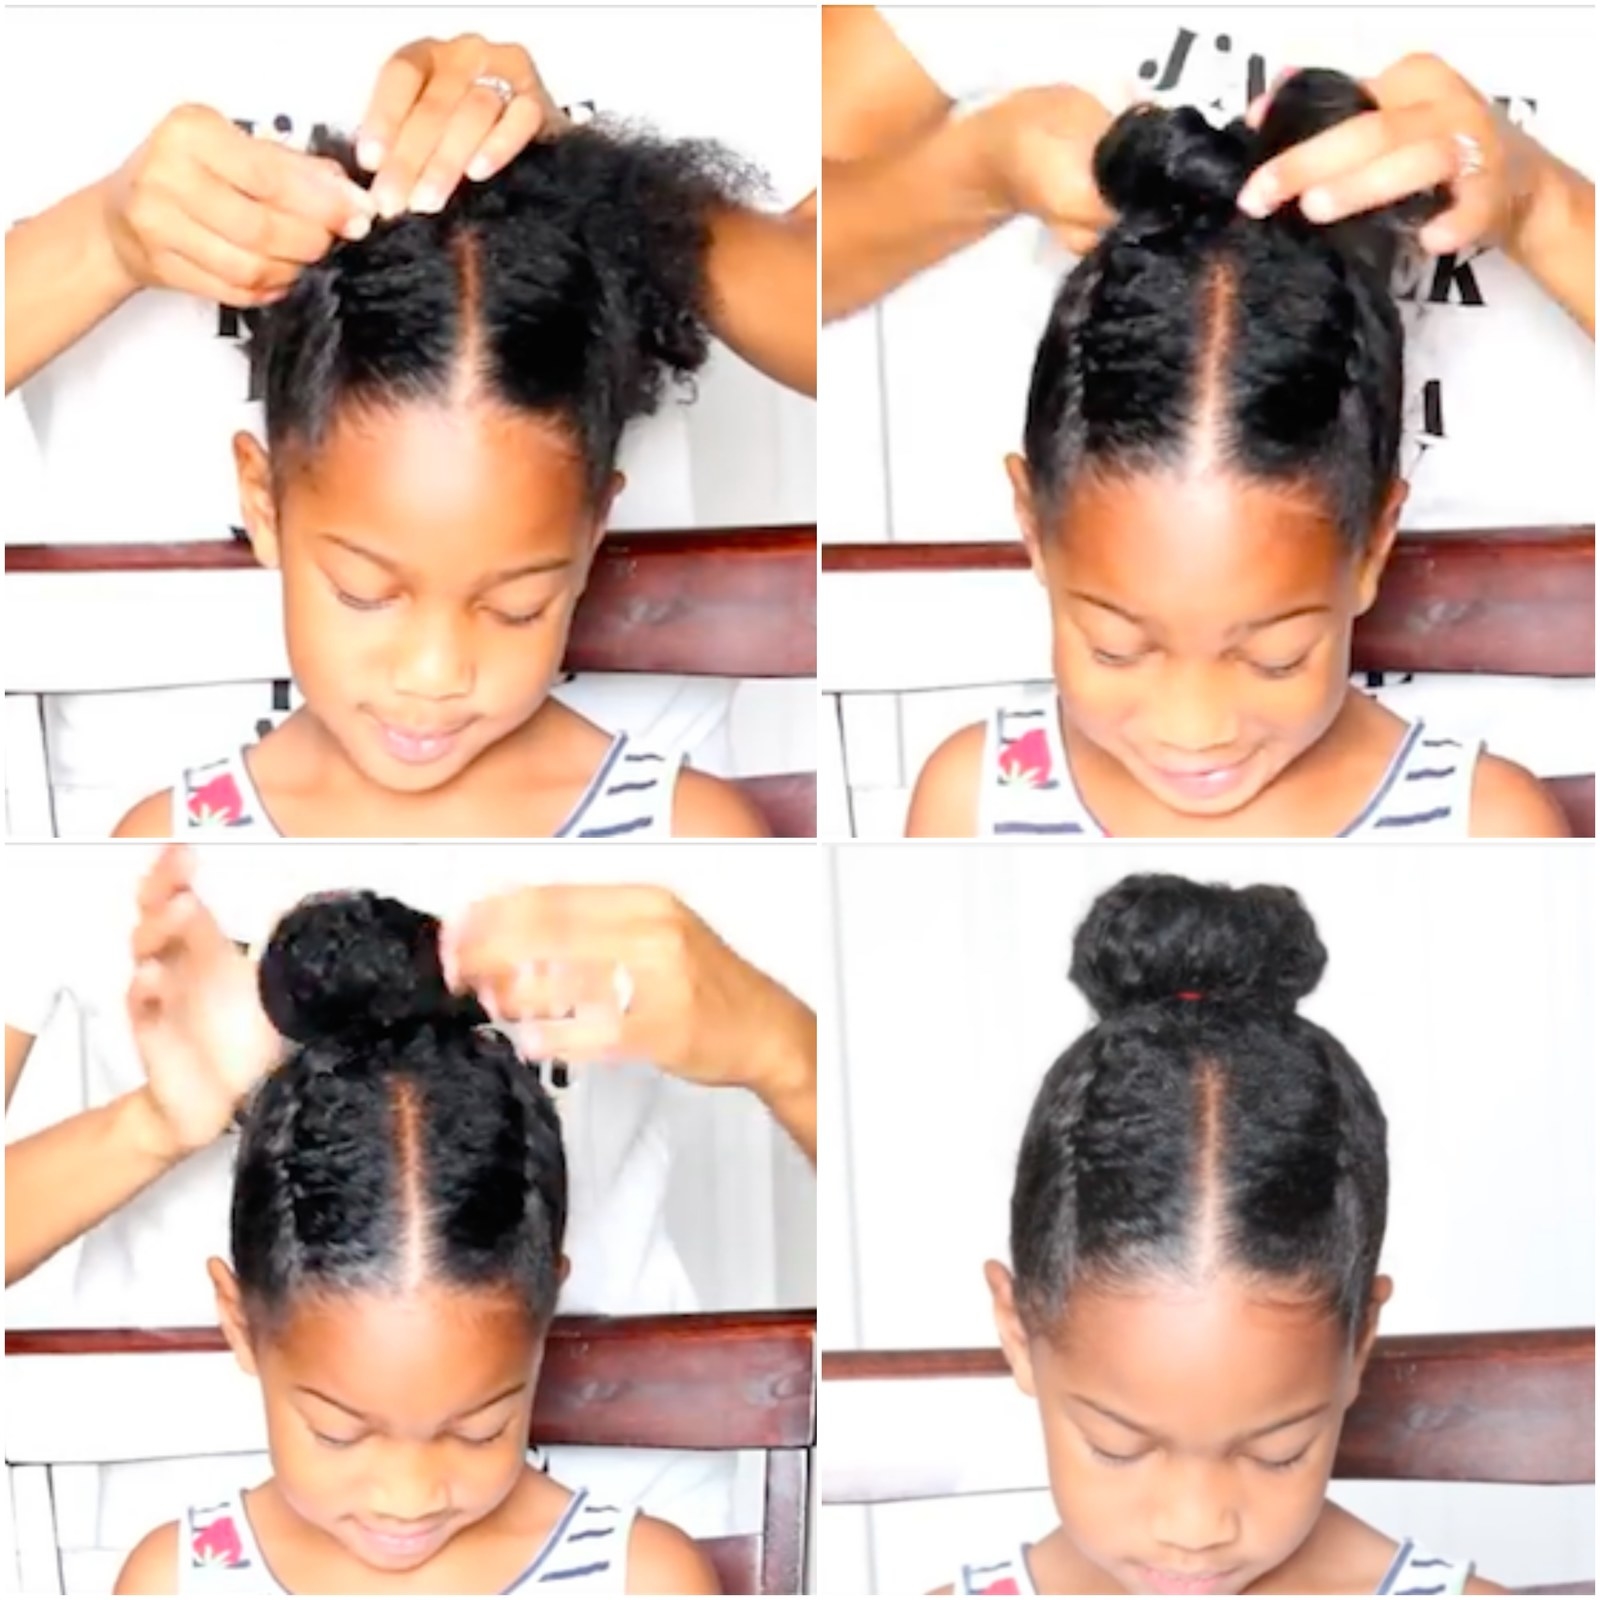 6 Easy Hairstyles for School that Will Make Mornings Simpler